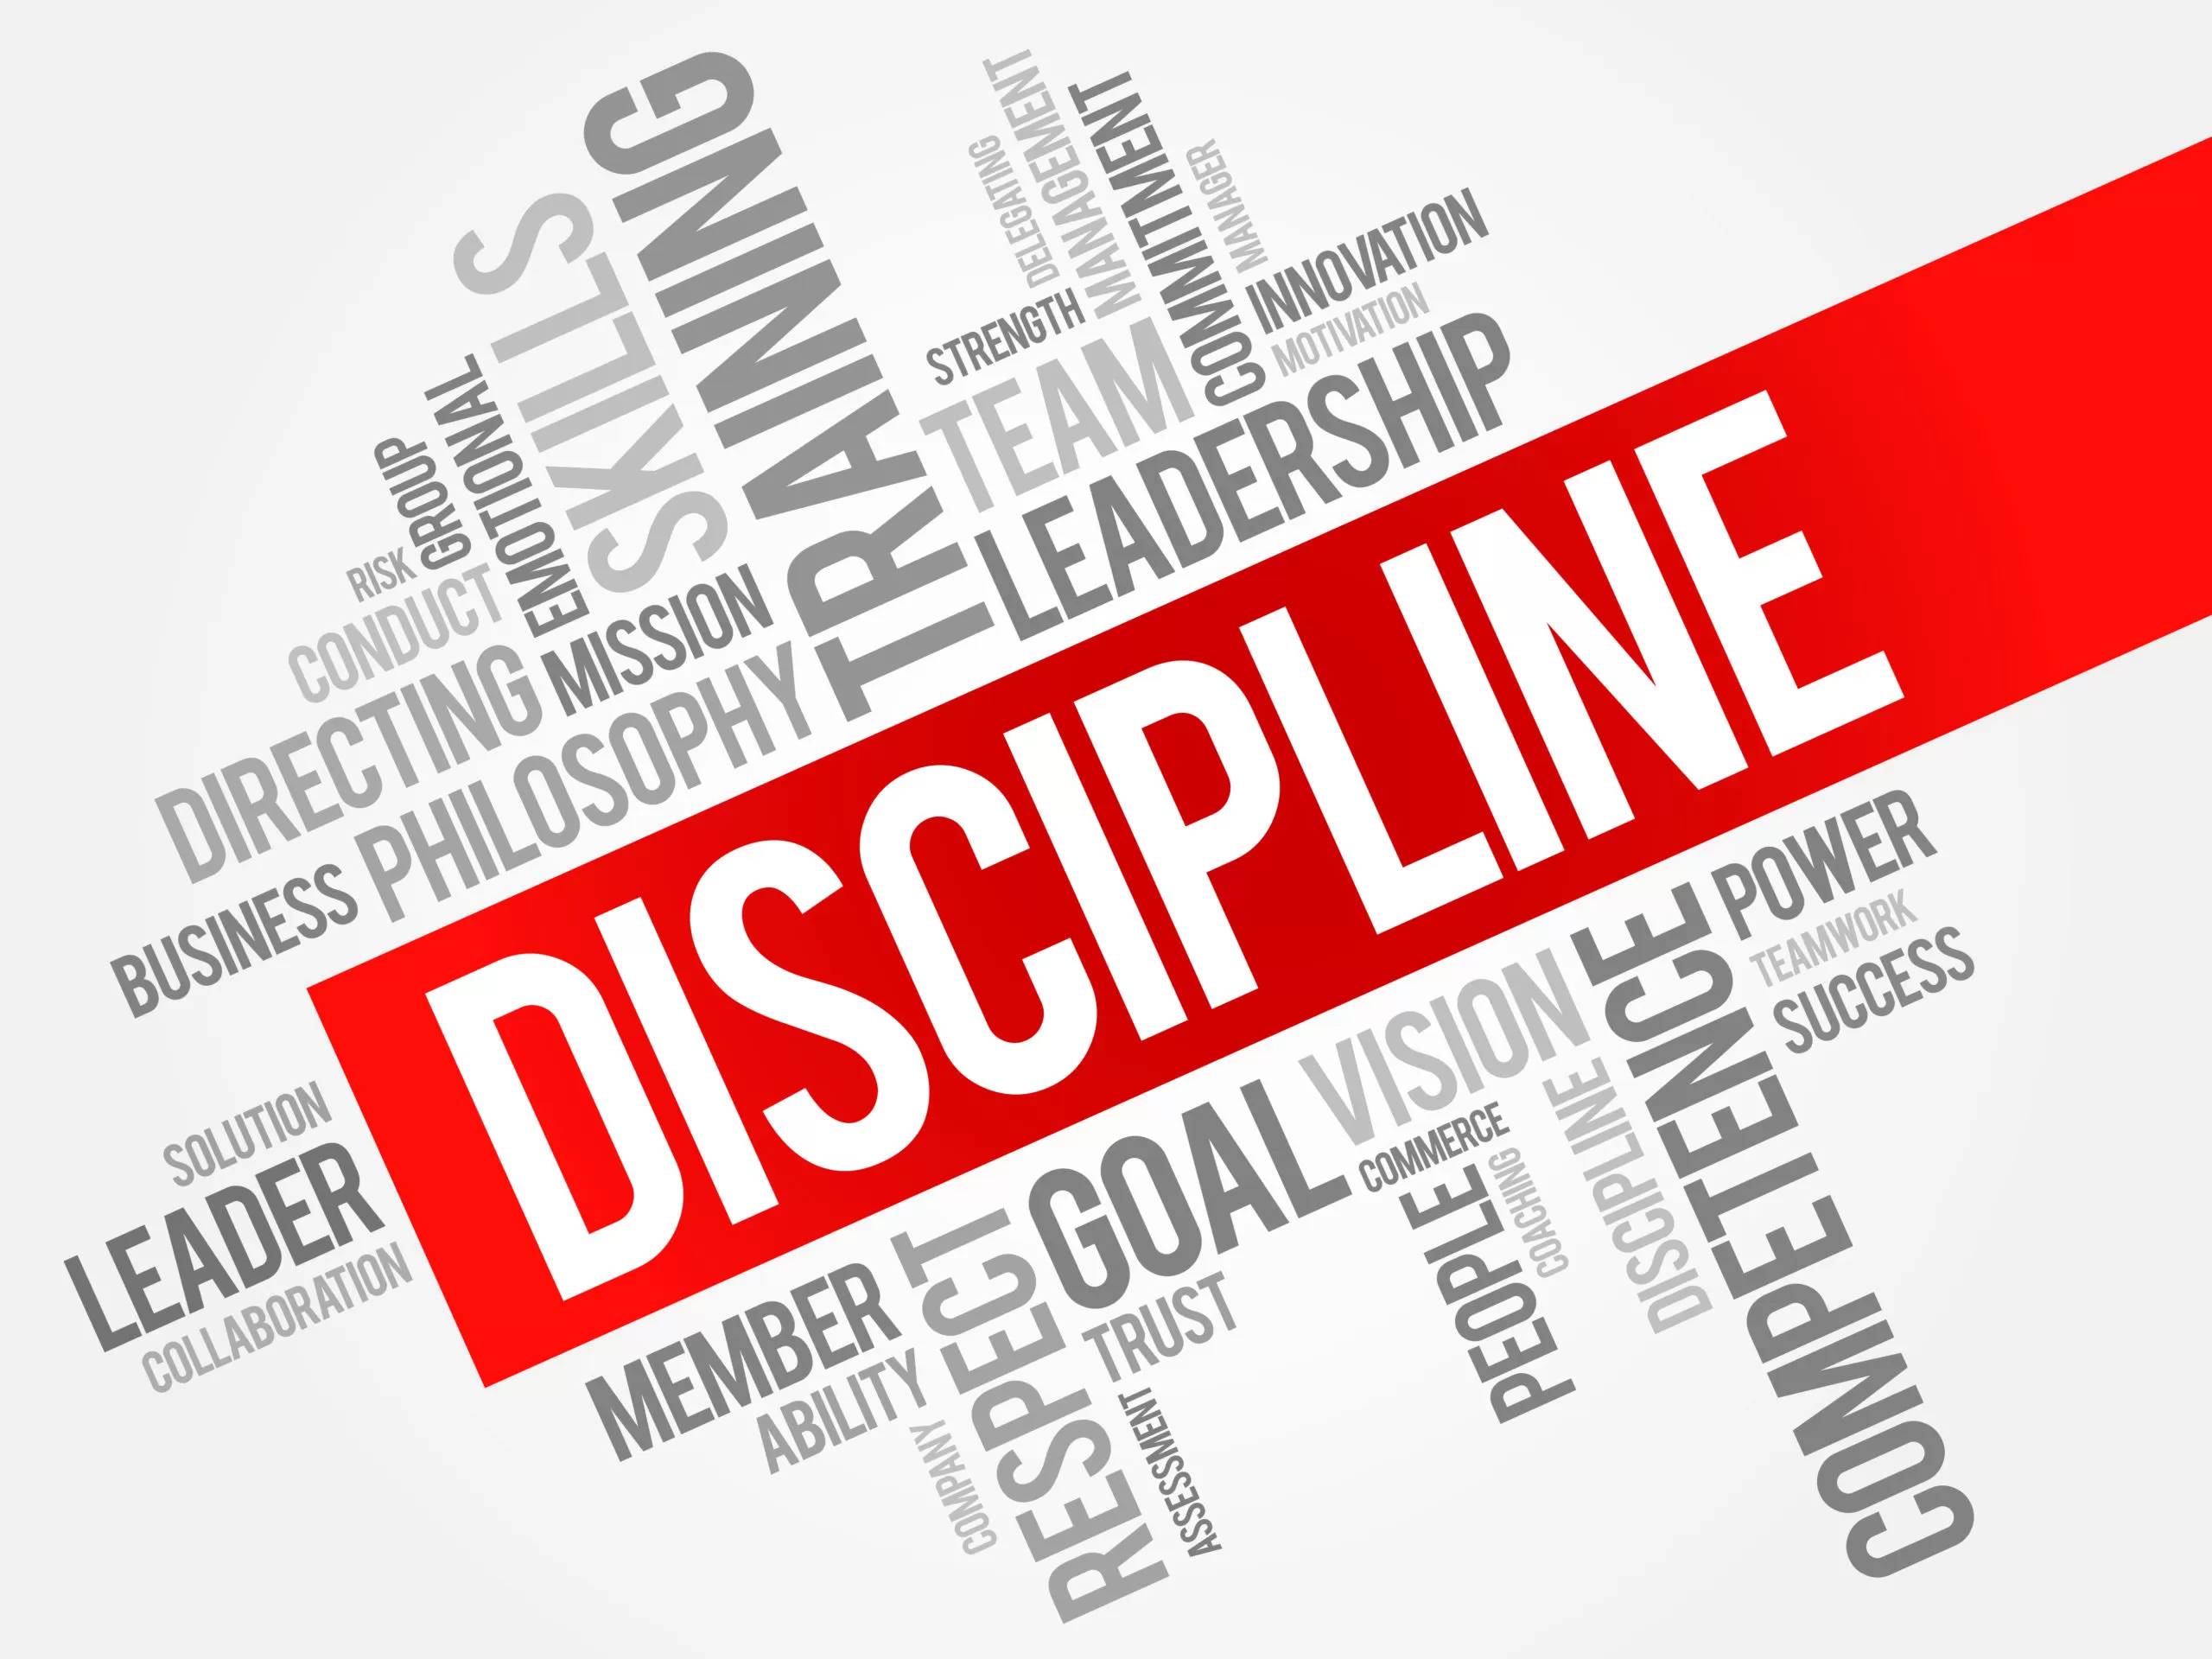 5 Steps for Effectively Disciplining Employees